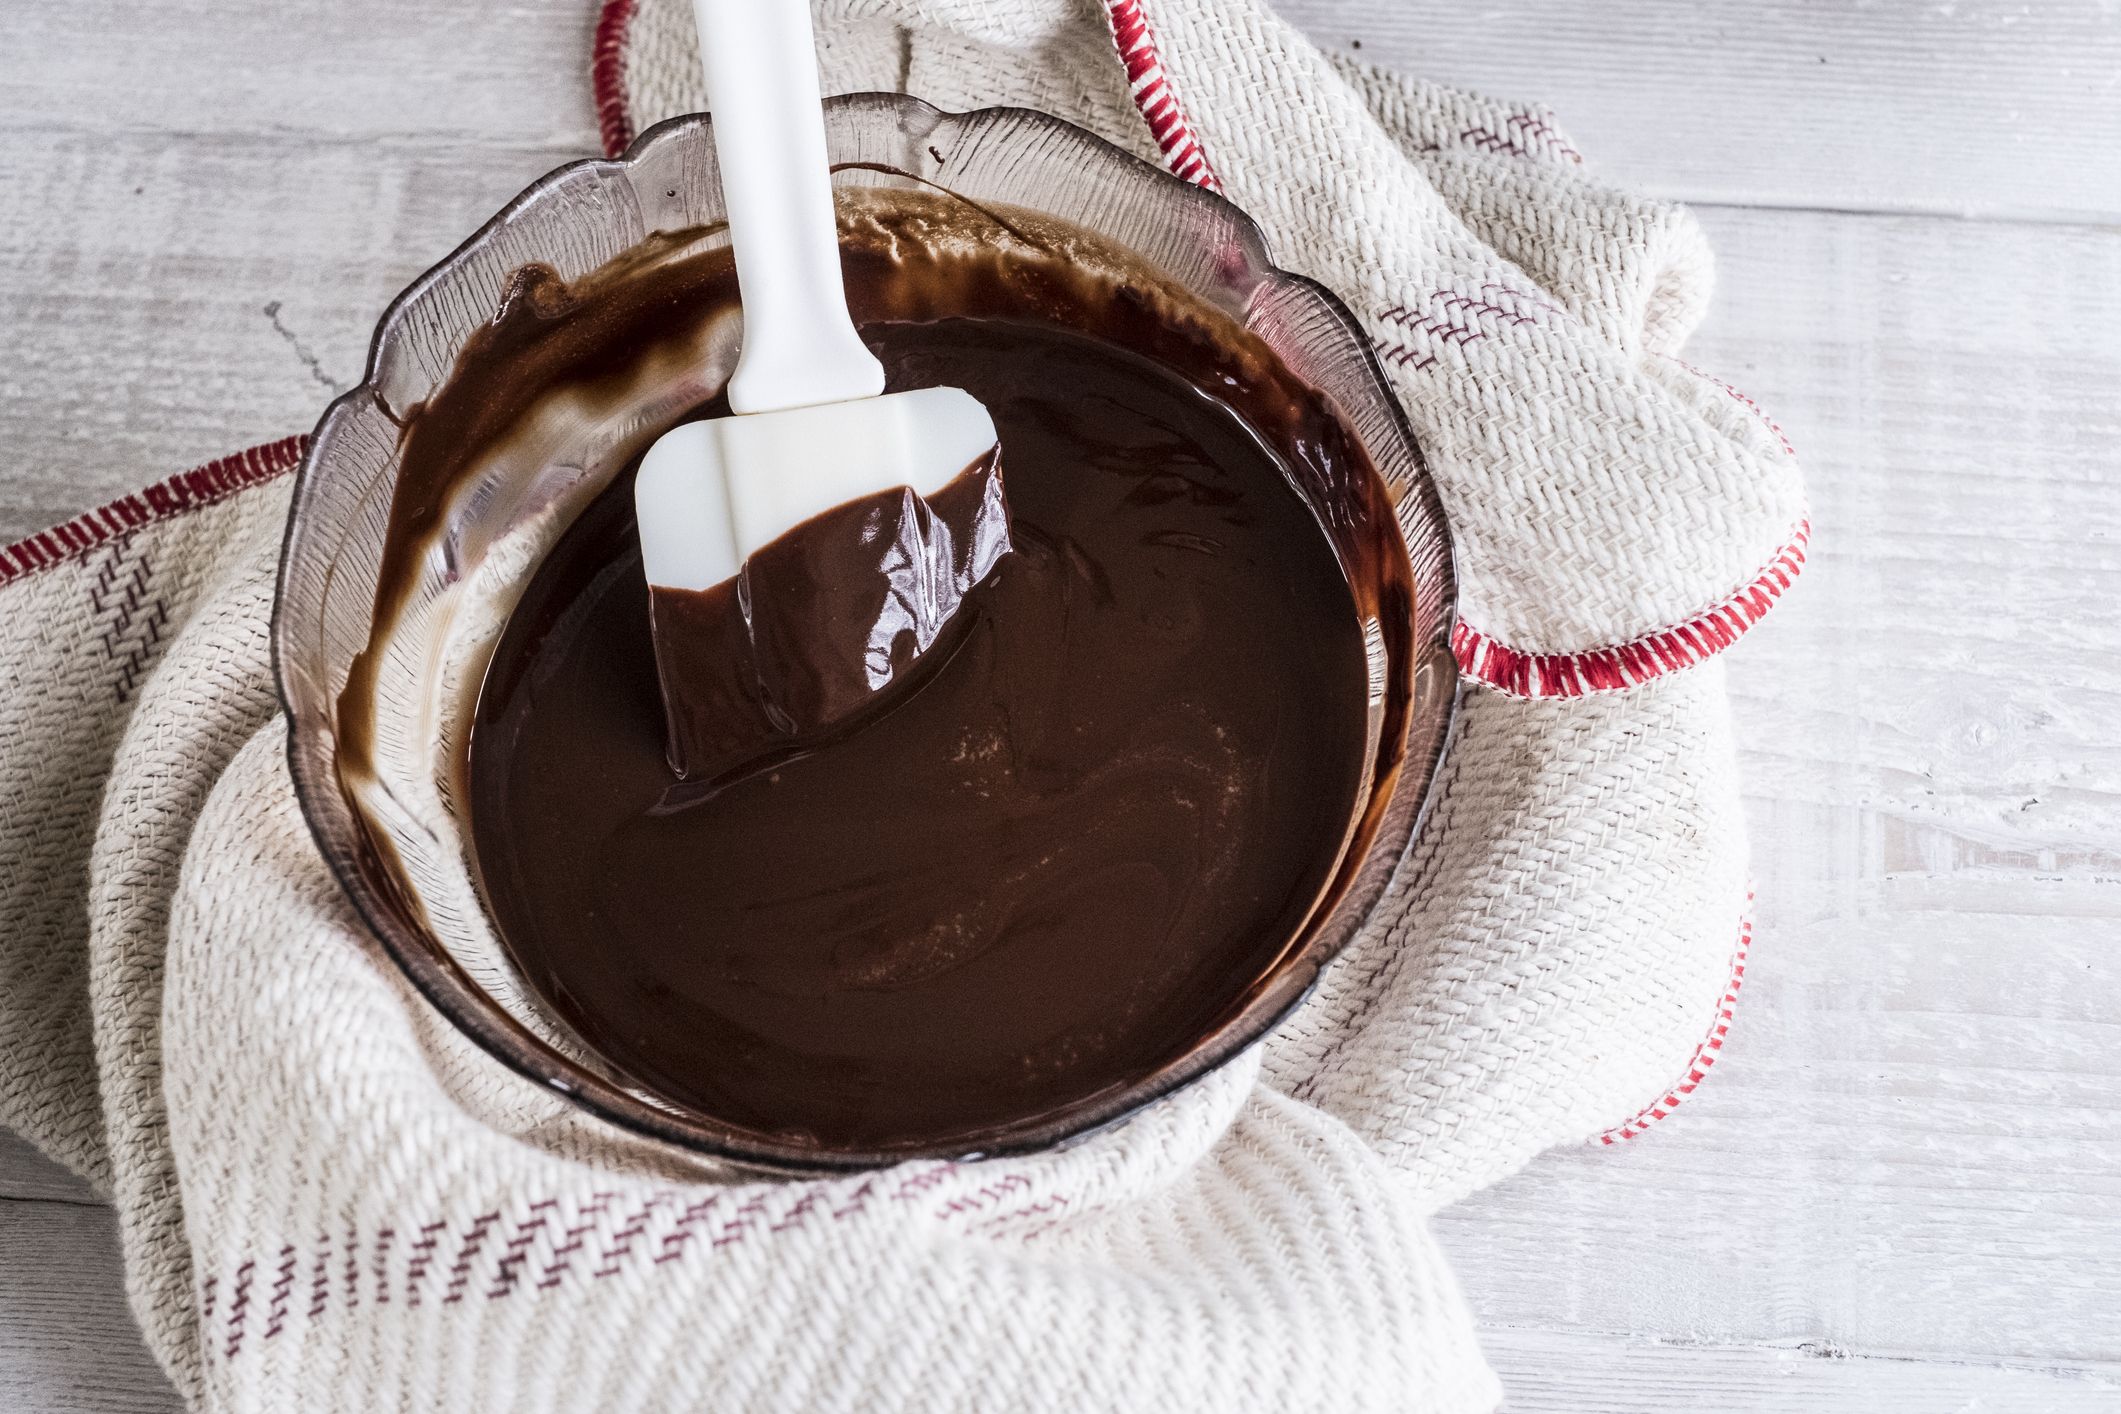 How To Melt Chocolate In The Microwave How To Melt Chocolate According To Culinary Experts,Crocheting For Beginners